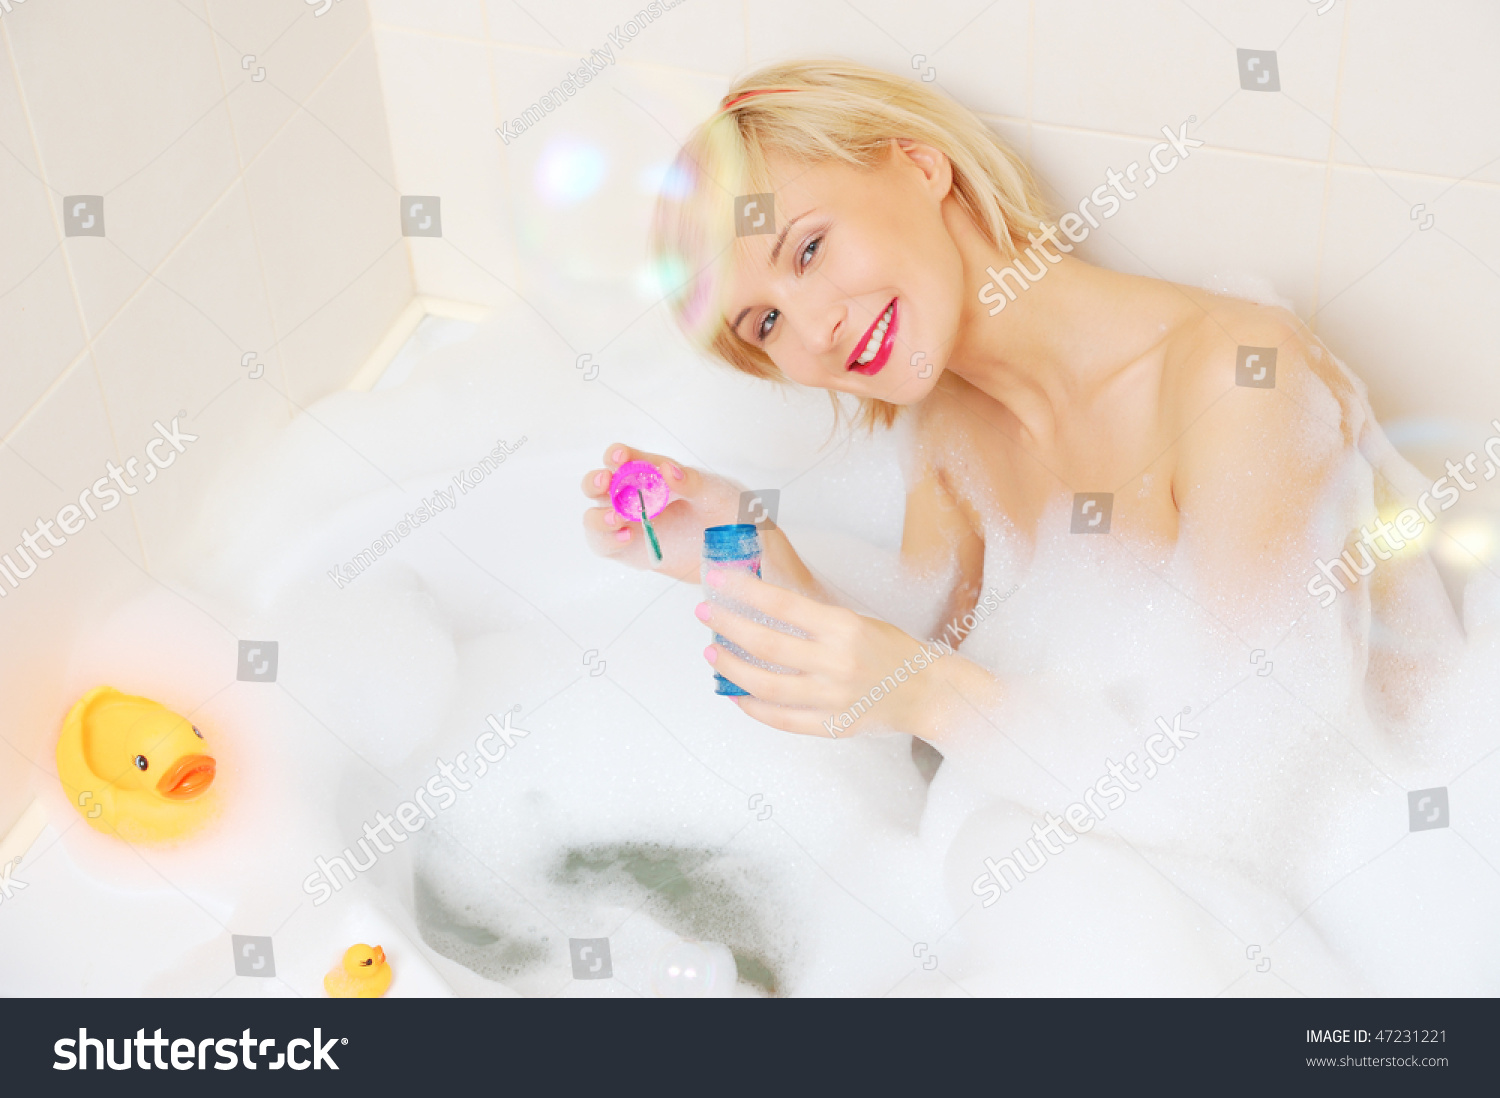 Smiling Blond Woman Lying In Bubble Bath With Toy Duck Stoc